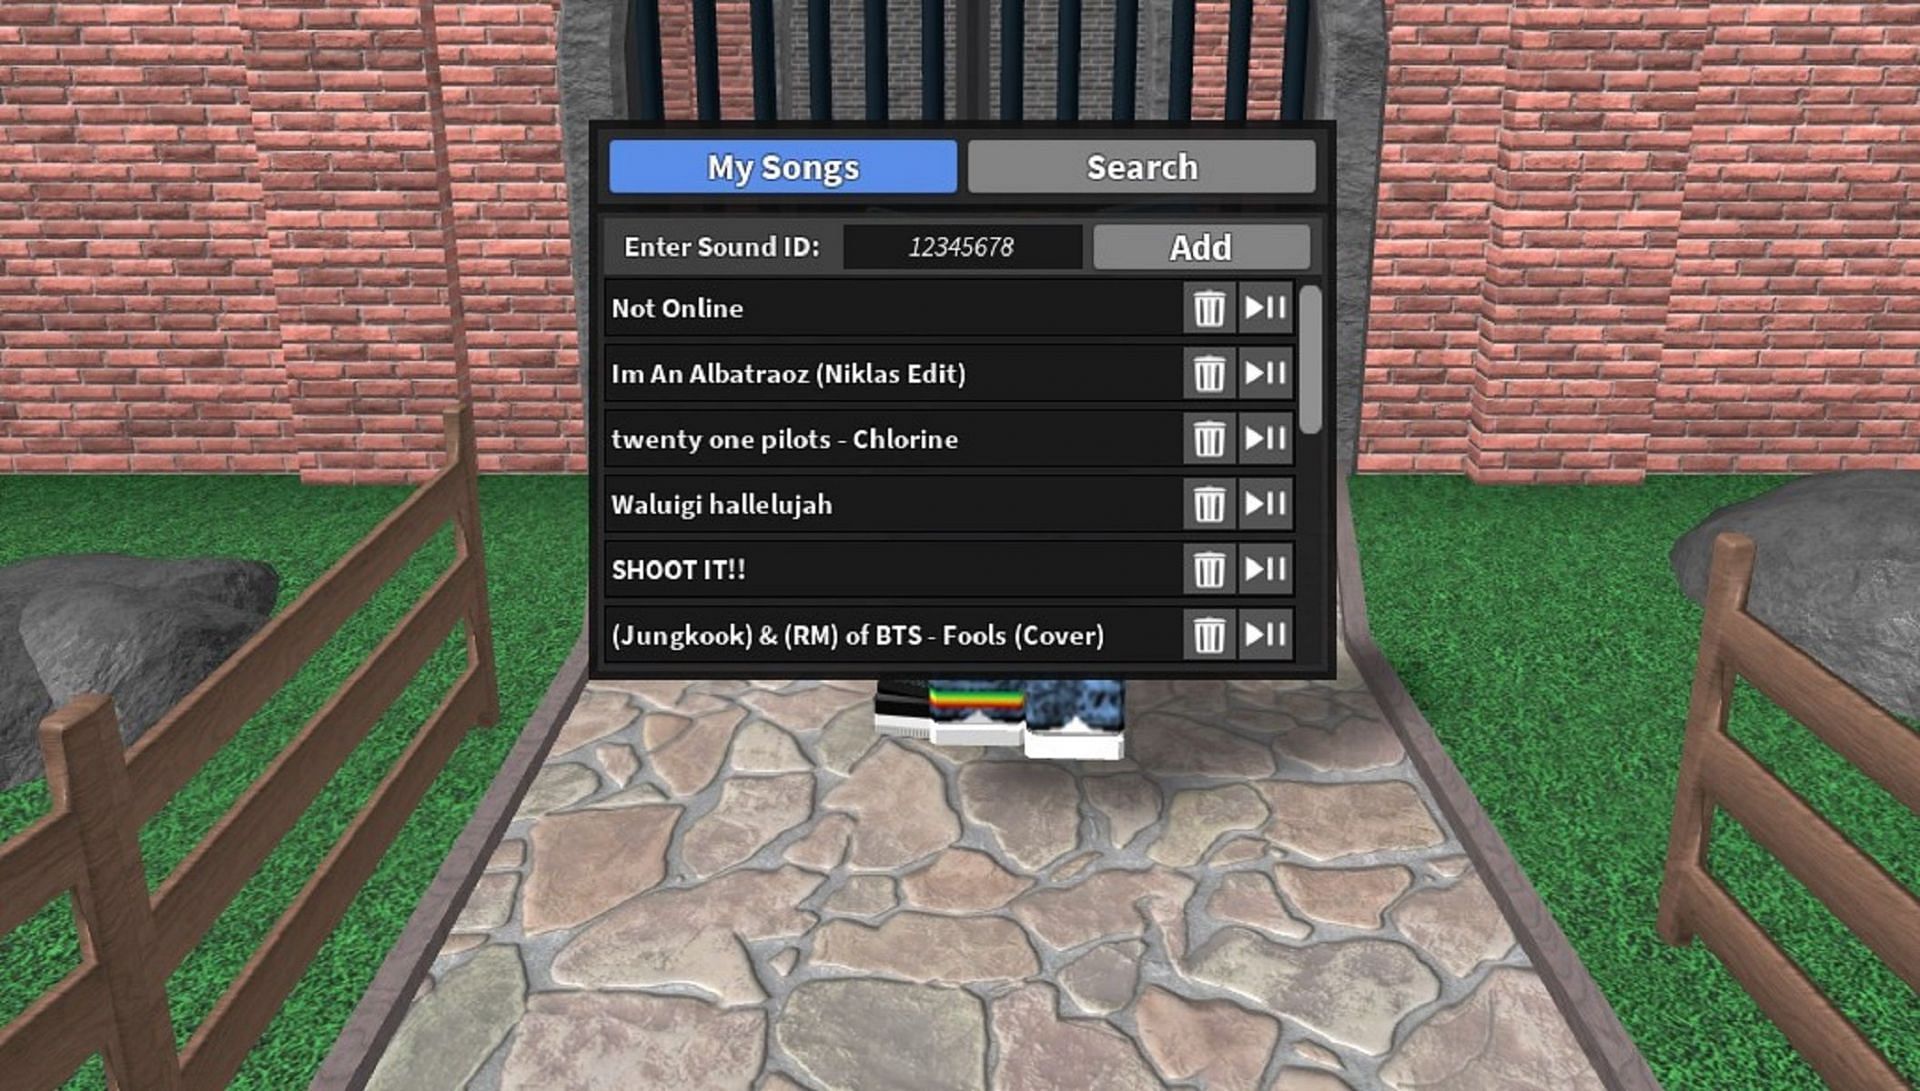 Best Roblox Sound IDs (May 2022) and music codes